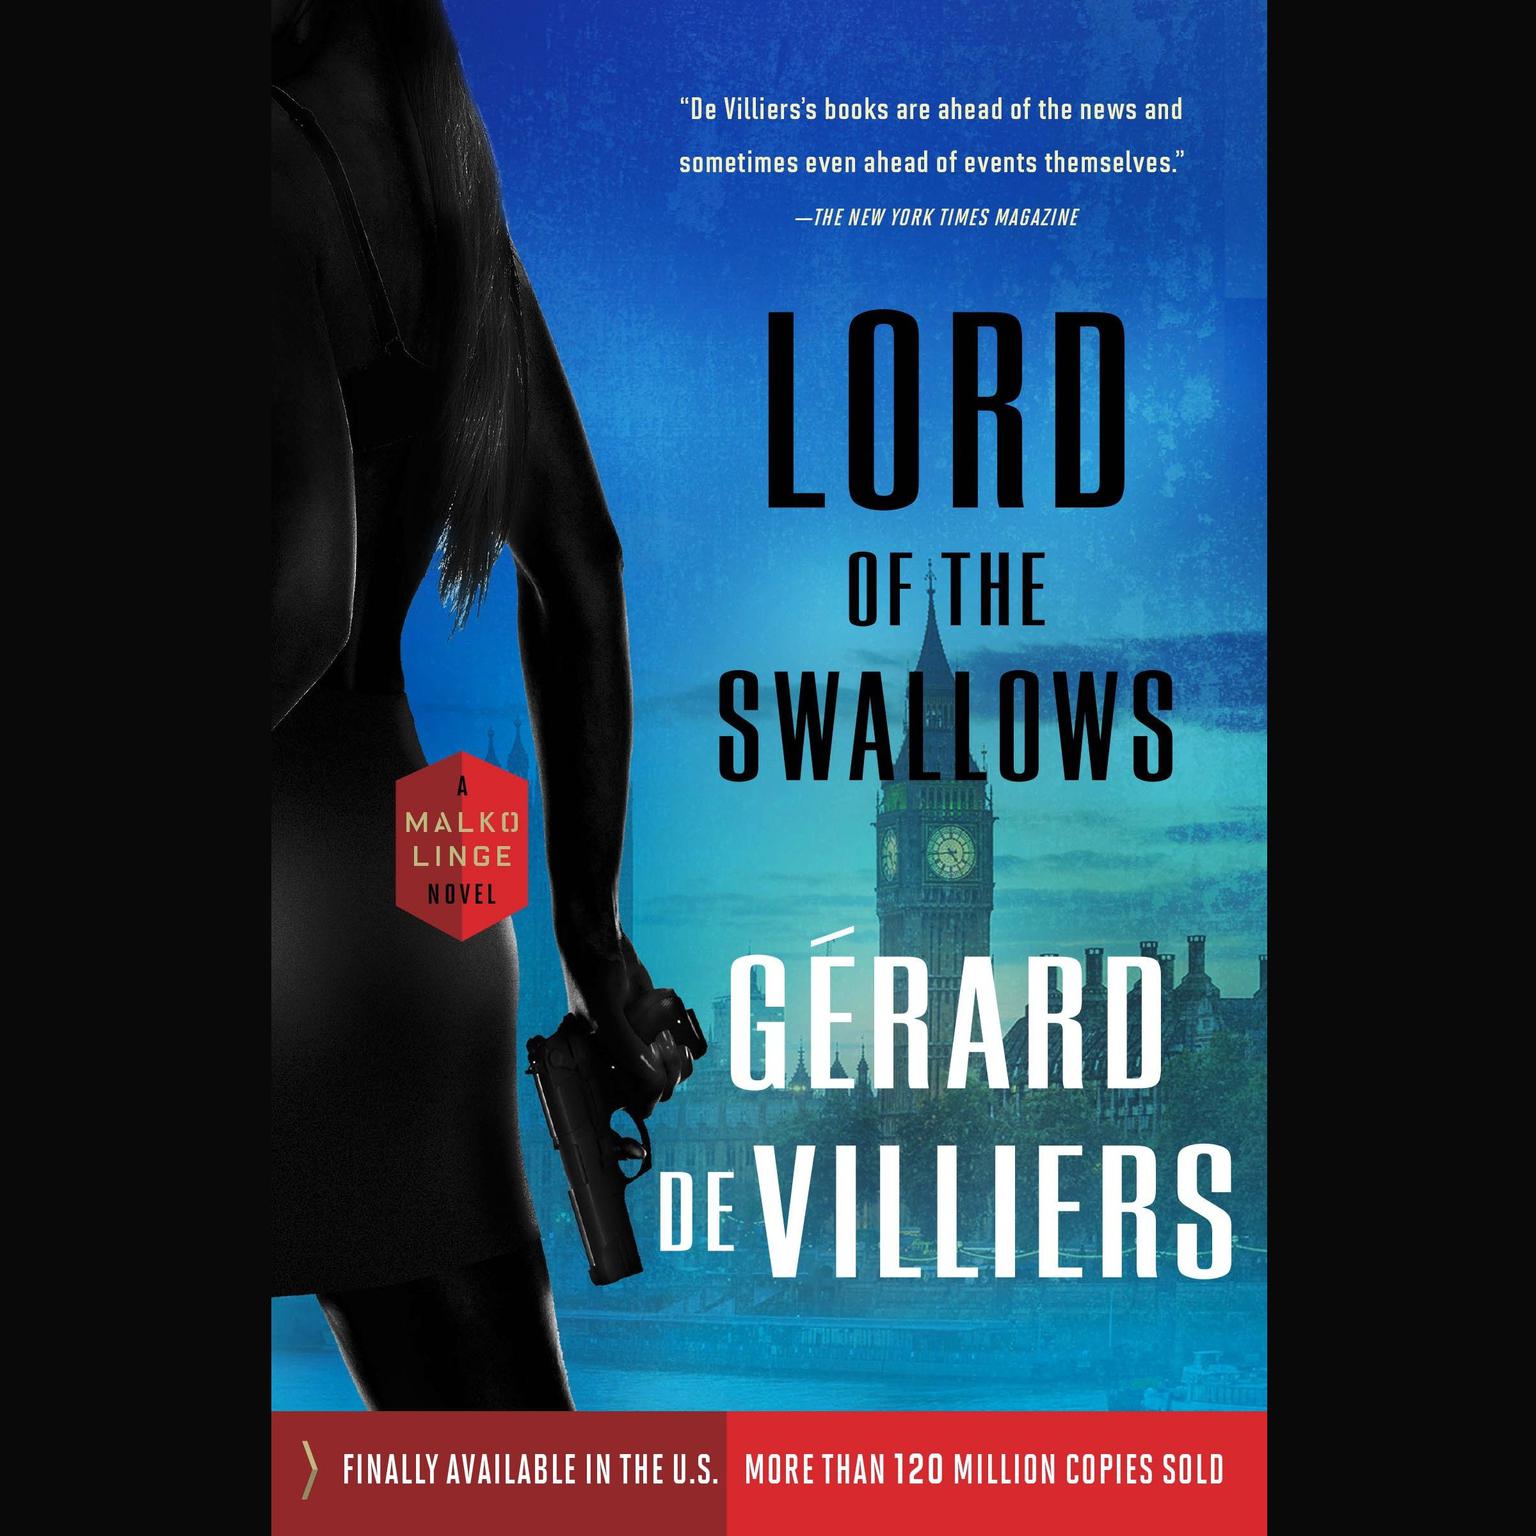 Lord of the Swallows: A Malko Linge Novel Audiobook, by Gérard de Villiers